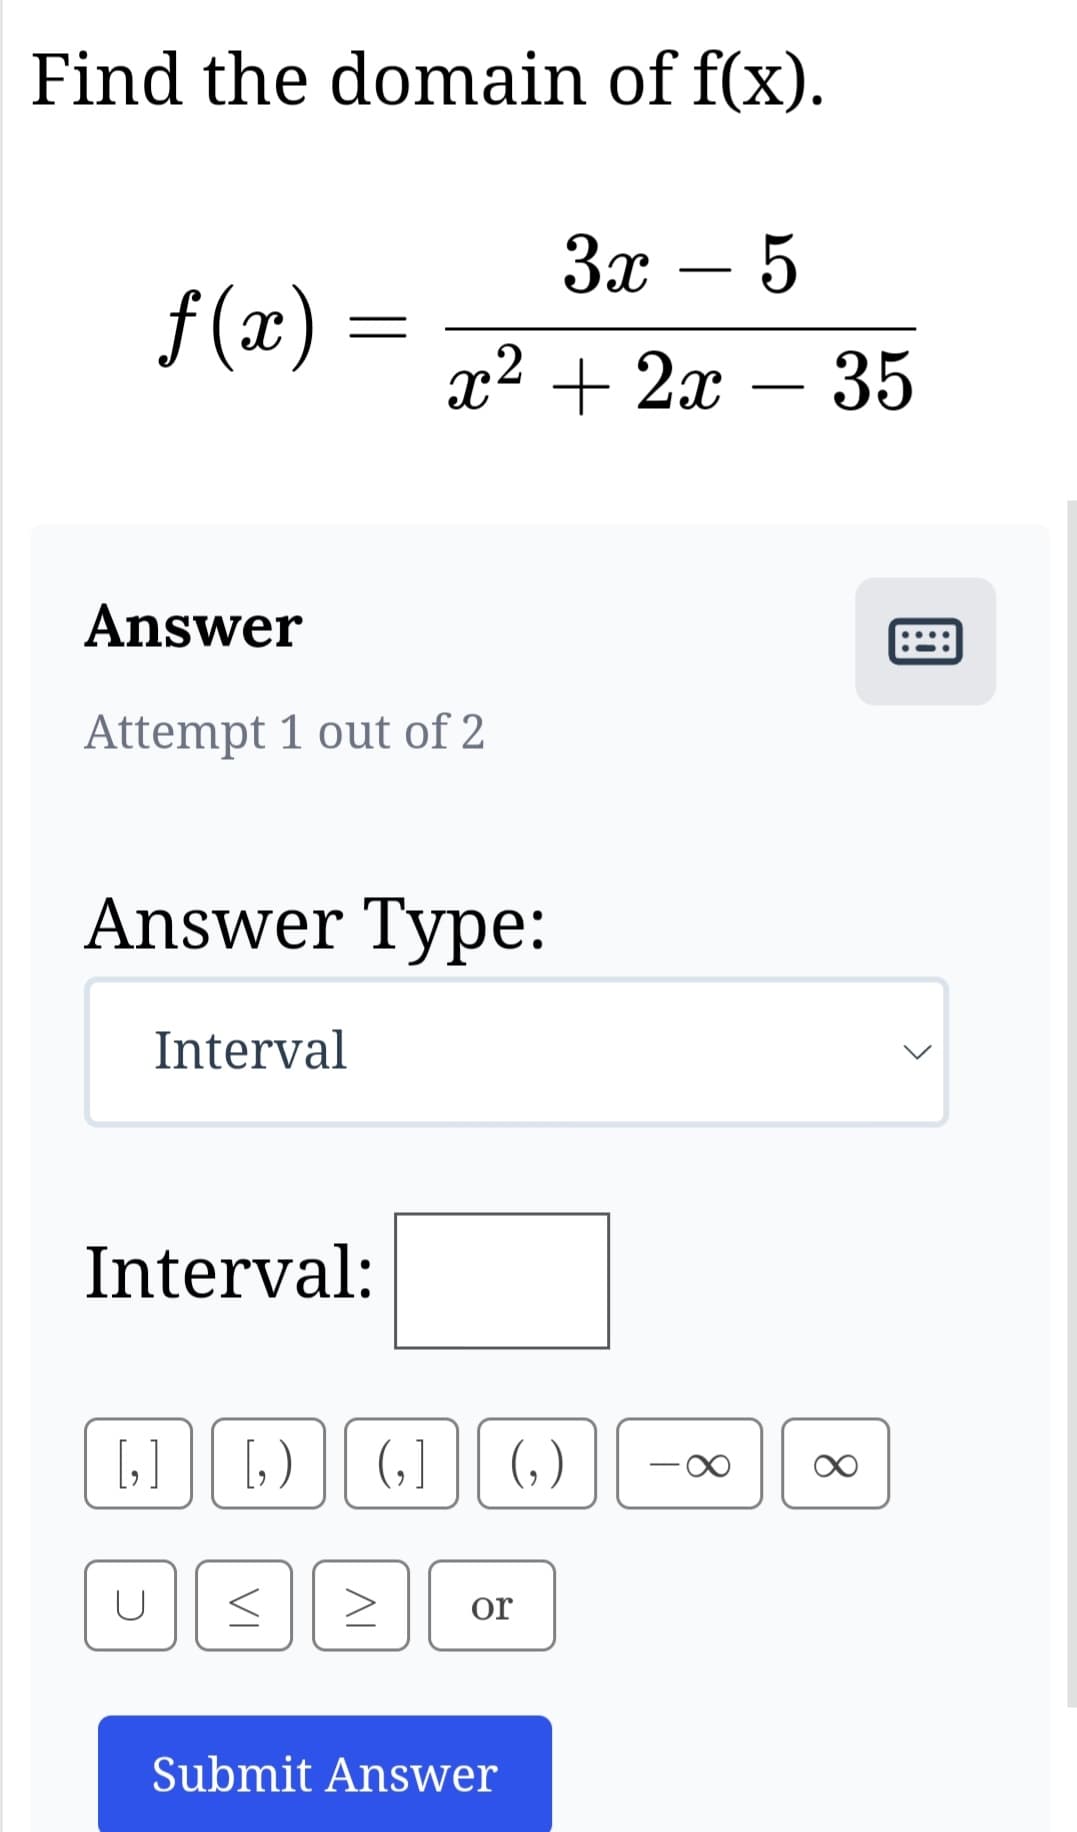 Find the domain of f(x).
f(x)
Answer
Attempt 1 out of 2
=
Answer Type:
Interval
U
Interval:
3x - 5
x² + 2x - 35
[₂] [,) (₂] (₂)
VI
IV
or
Submit Answer
<